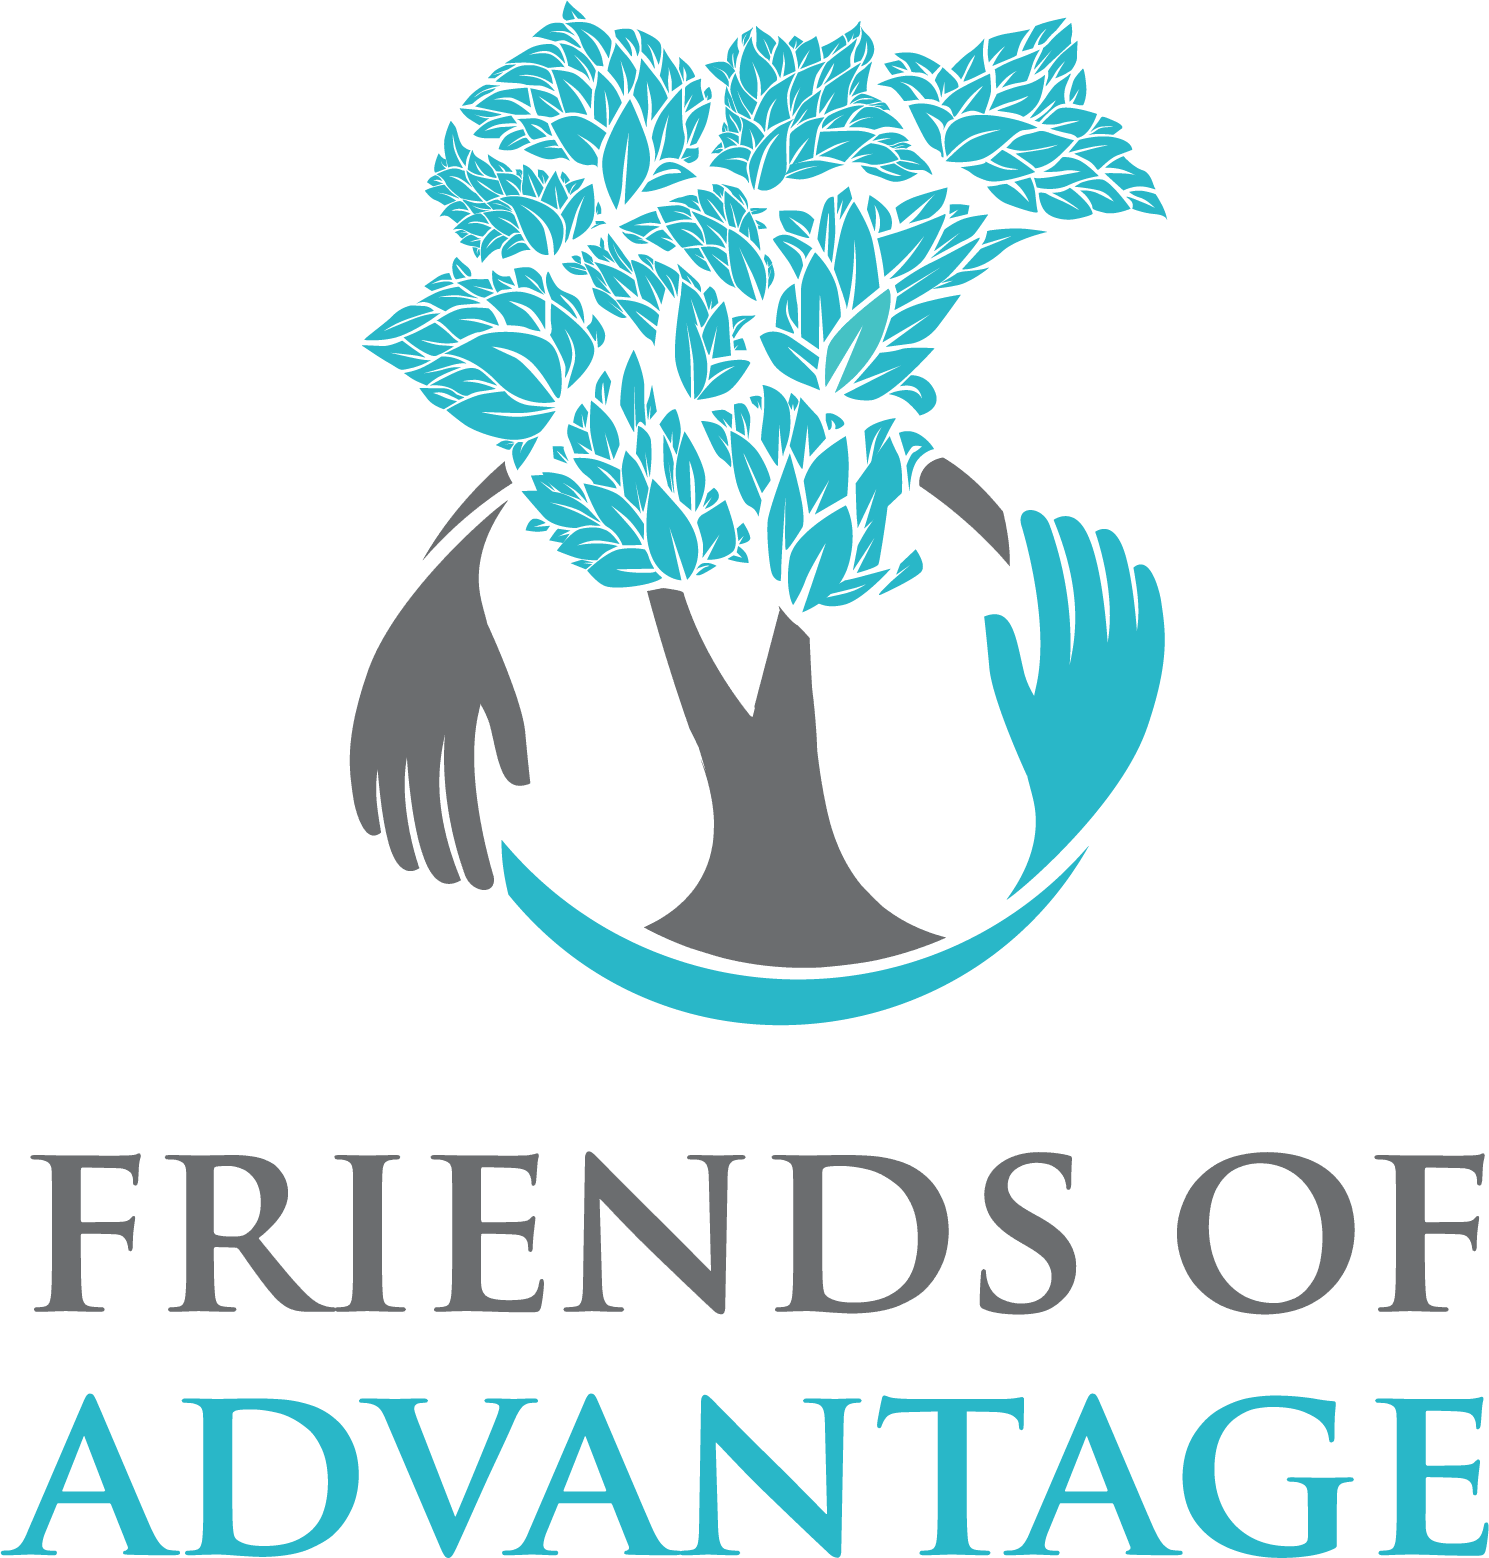 Friends of Advantage (FOA) is a 501c3 non-profit that directly assists Advantage Behavioral Health Systems with bridging gaps in funding for individuals